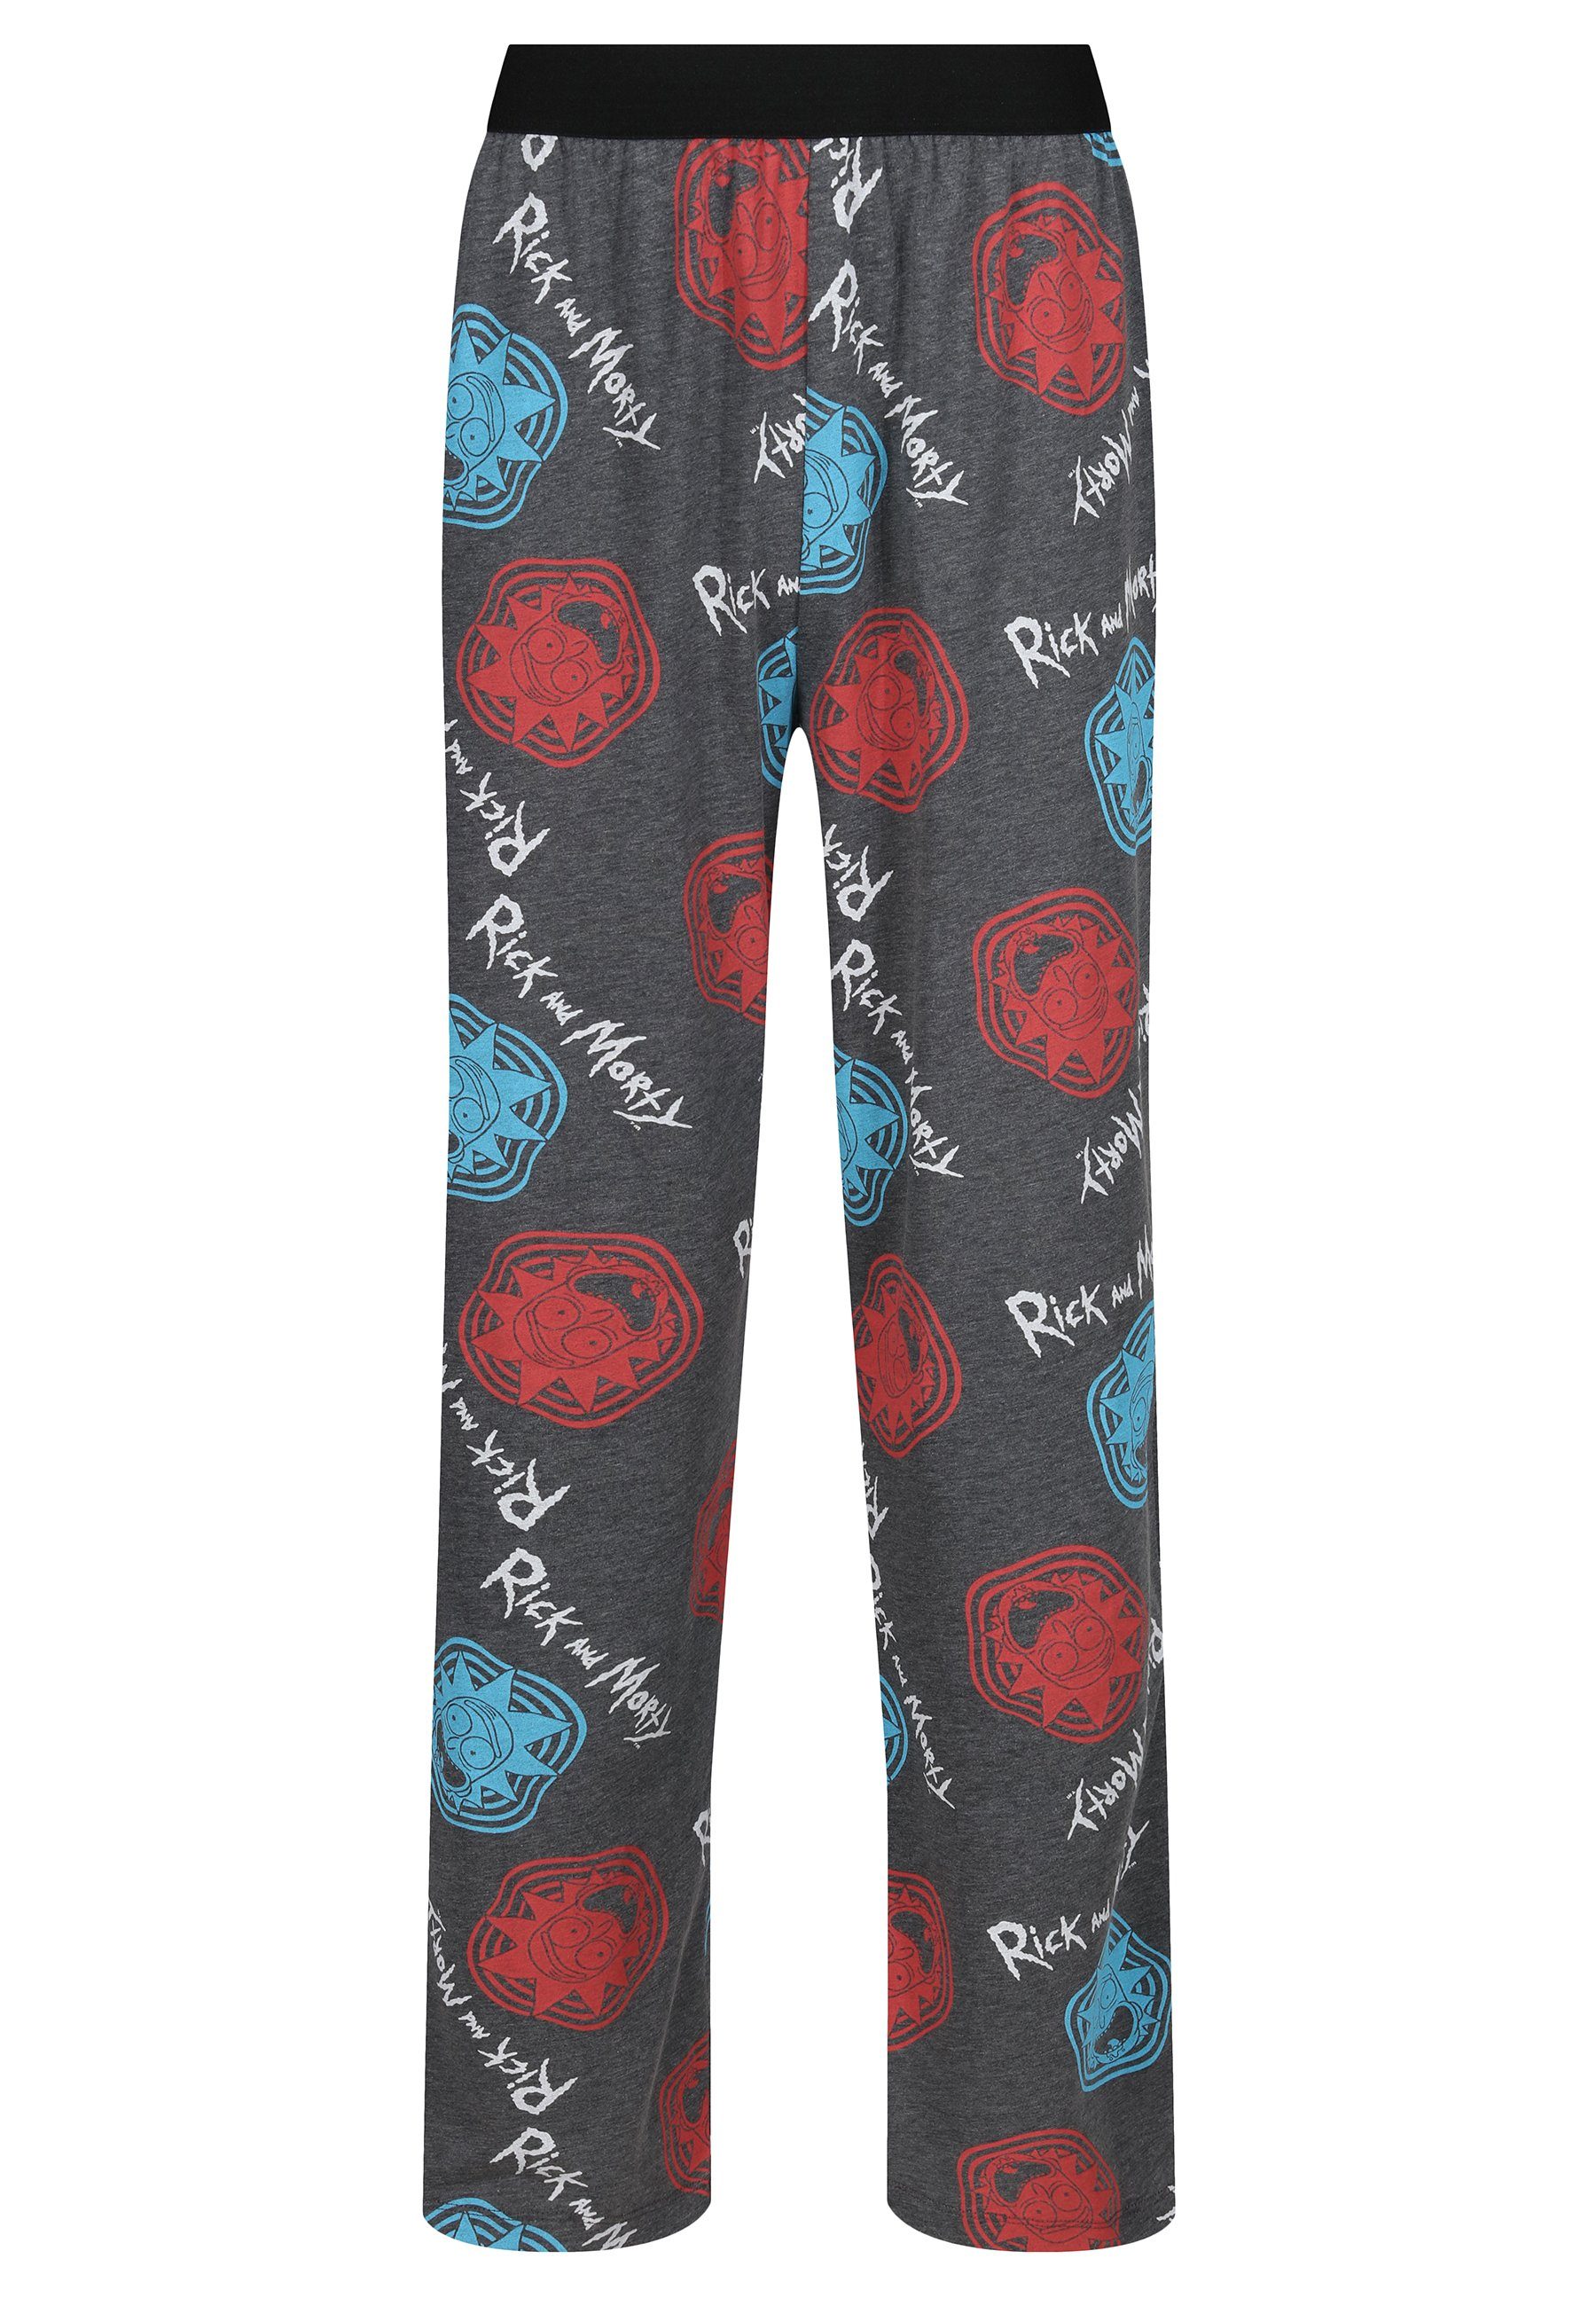 Recovered Loungepants Lounge Pant - Rick and Morty - Red and Blue